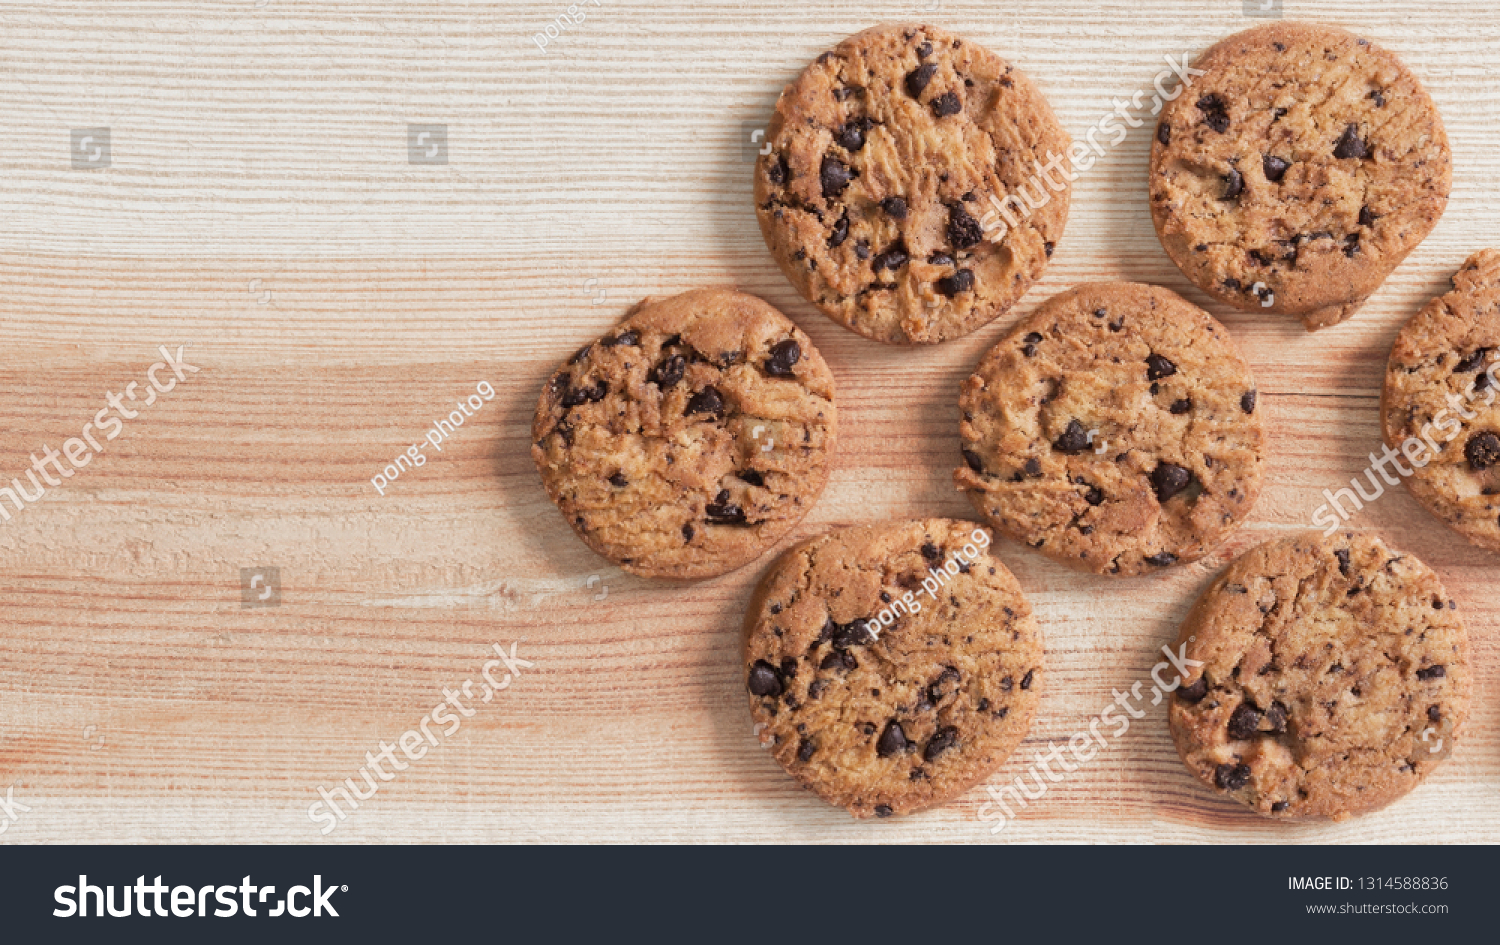 Chocolate chip cookies on the wood table. Copy space for your text or image. #1314588836